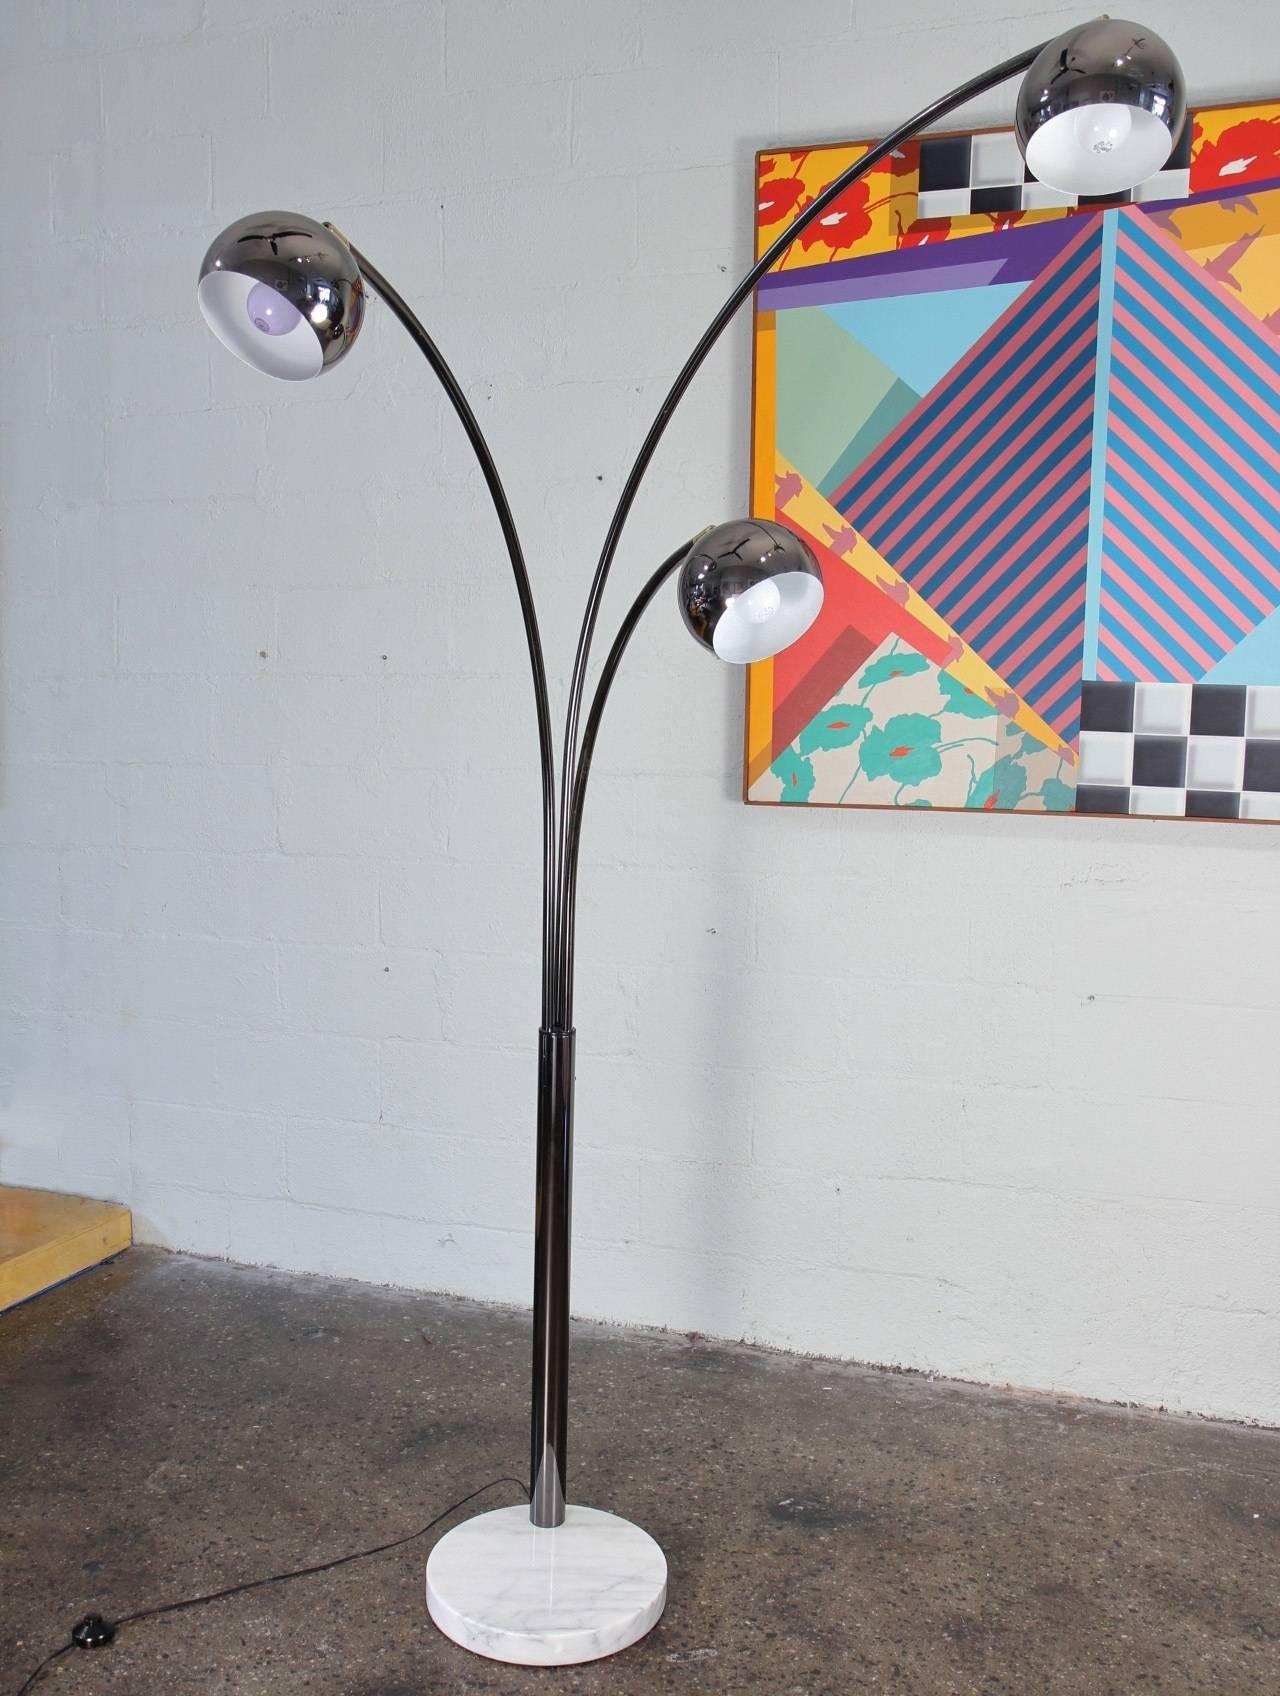 A massive three-globe arc lamp with marble base designed by Goffredo Reggiani. This Italian modern floor lamp has an elegant smoked chrome finish that's a bit subtler than polished chrome. The globe shades are movable. There's a foot switch and a